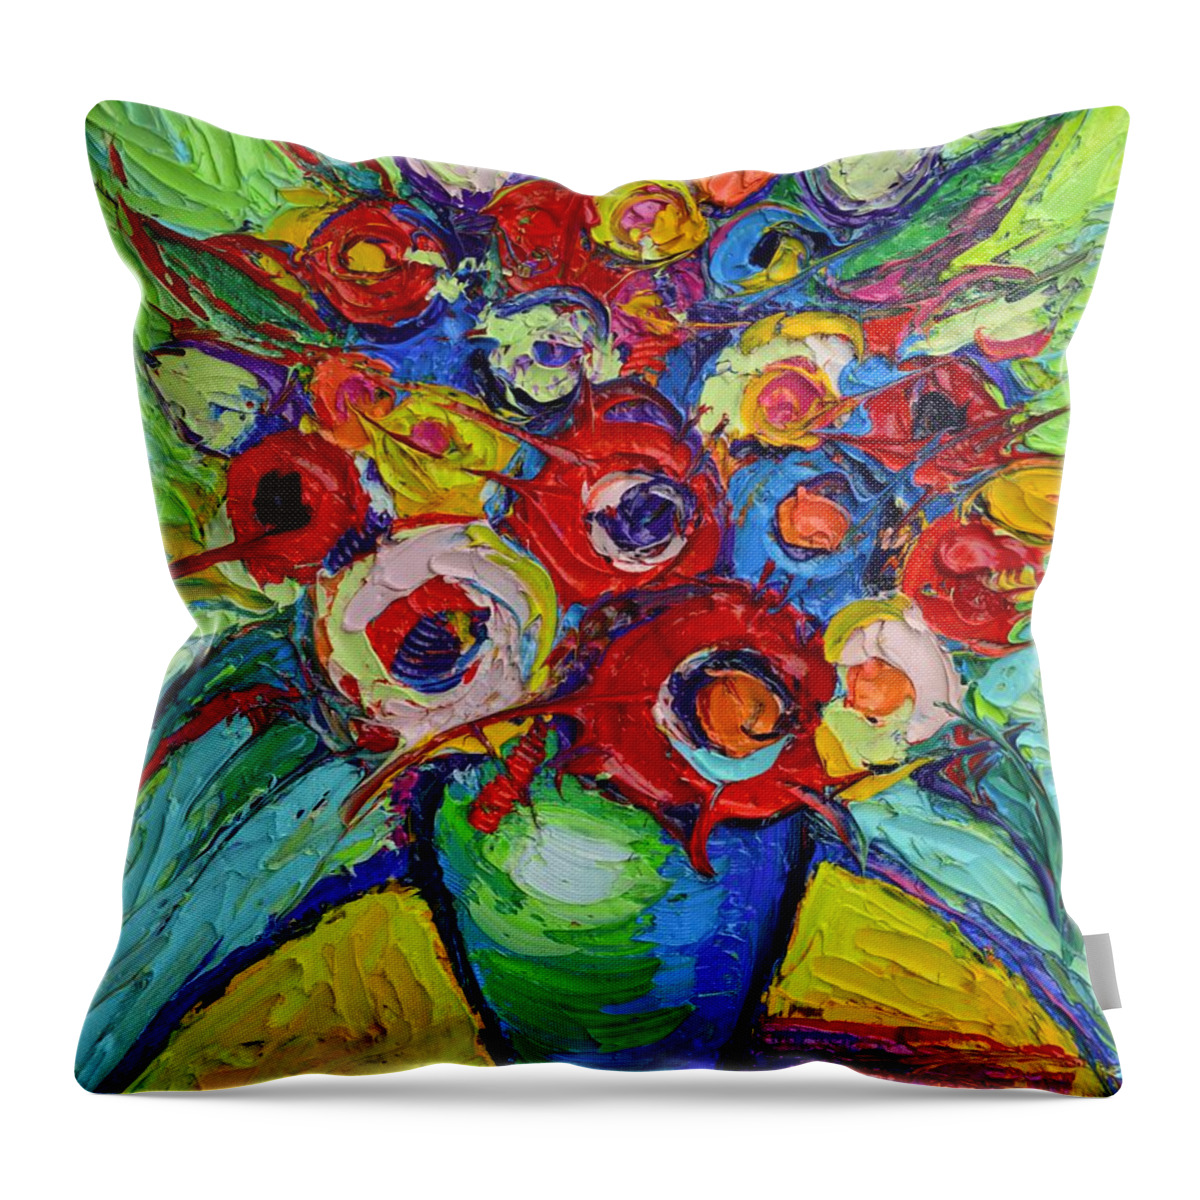 Abstract Throw Pillow featuring the painting Happy Bouquet Of Poppies And Colorful Wildflowers On Round Yellow Table Impasto Abstract Flowers by Ana Maria Edulescu